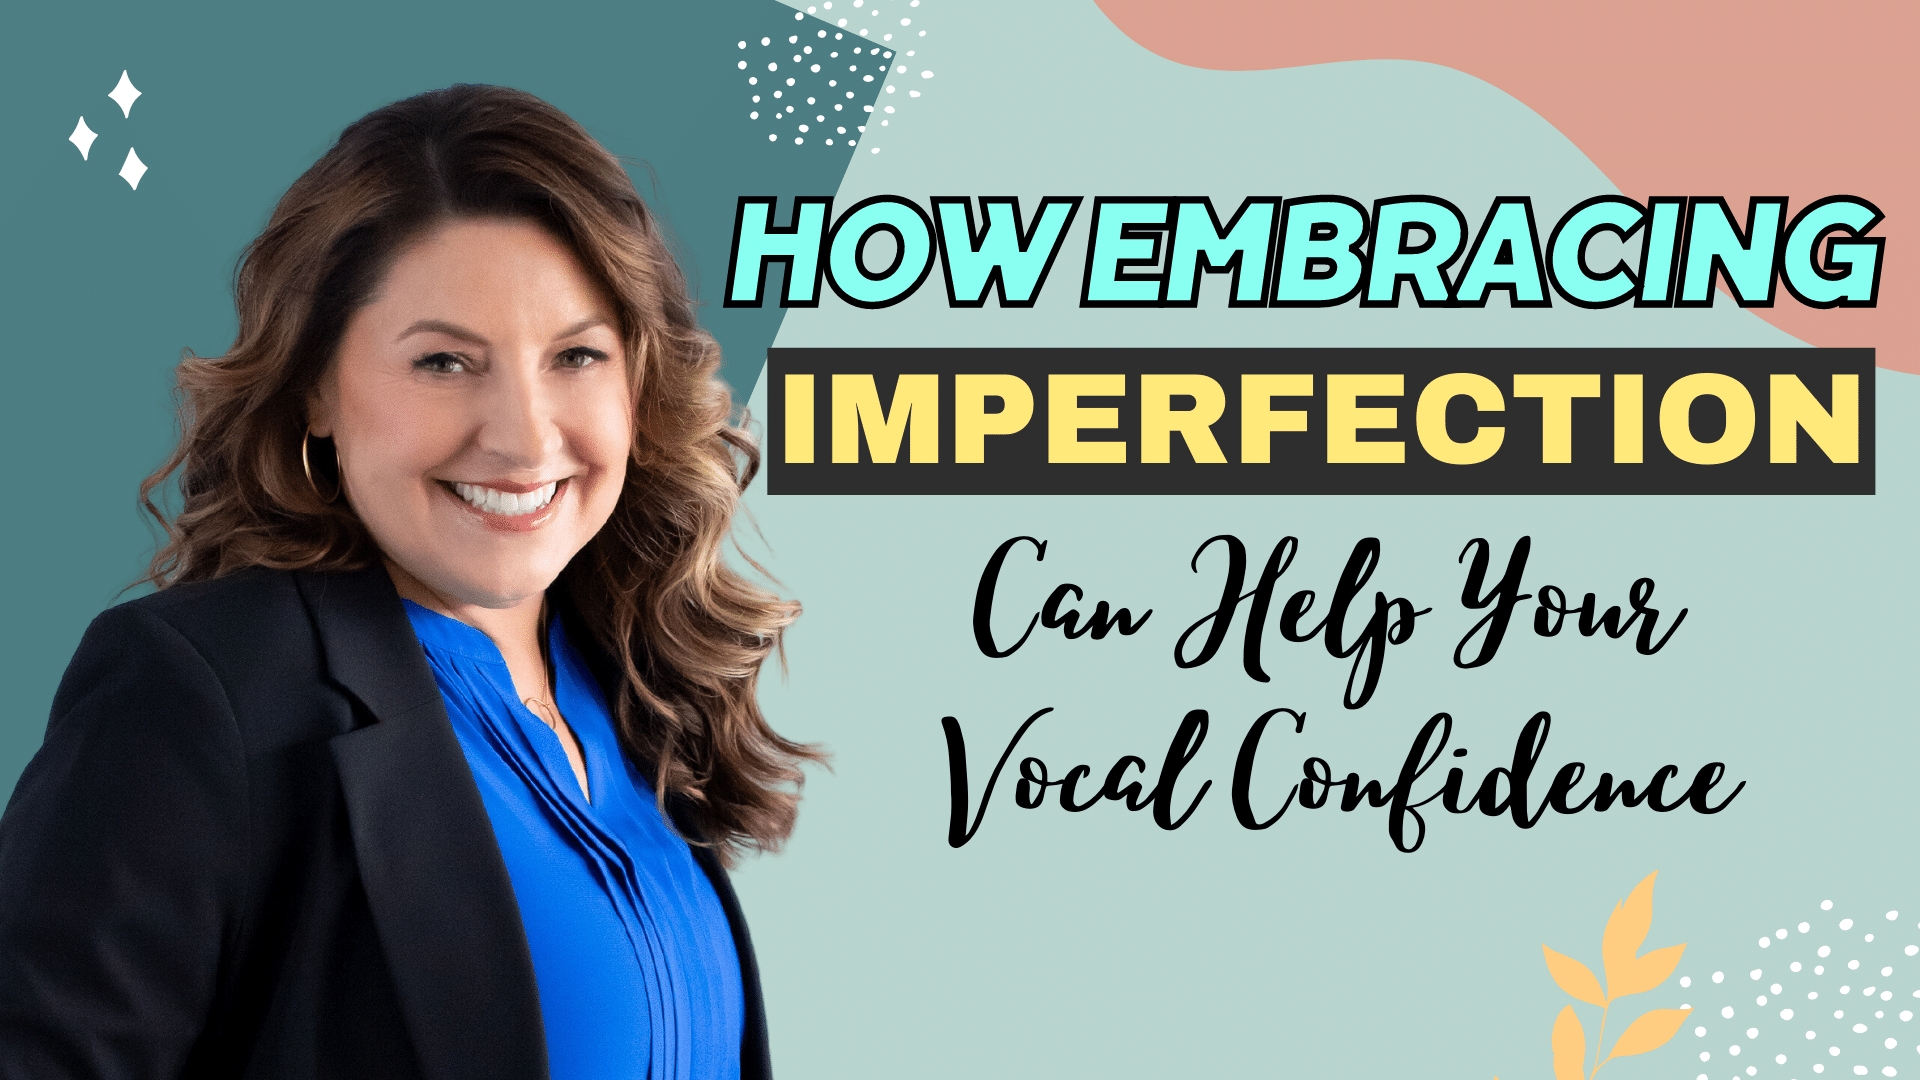 How Embracing Imperfection can Help Your Vocal Confidence